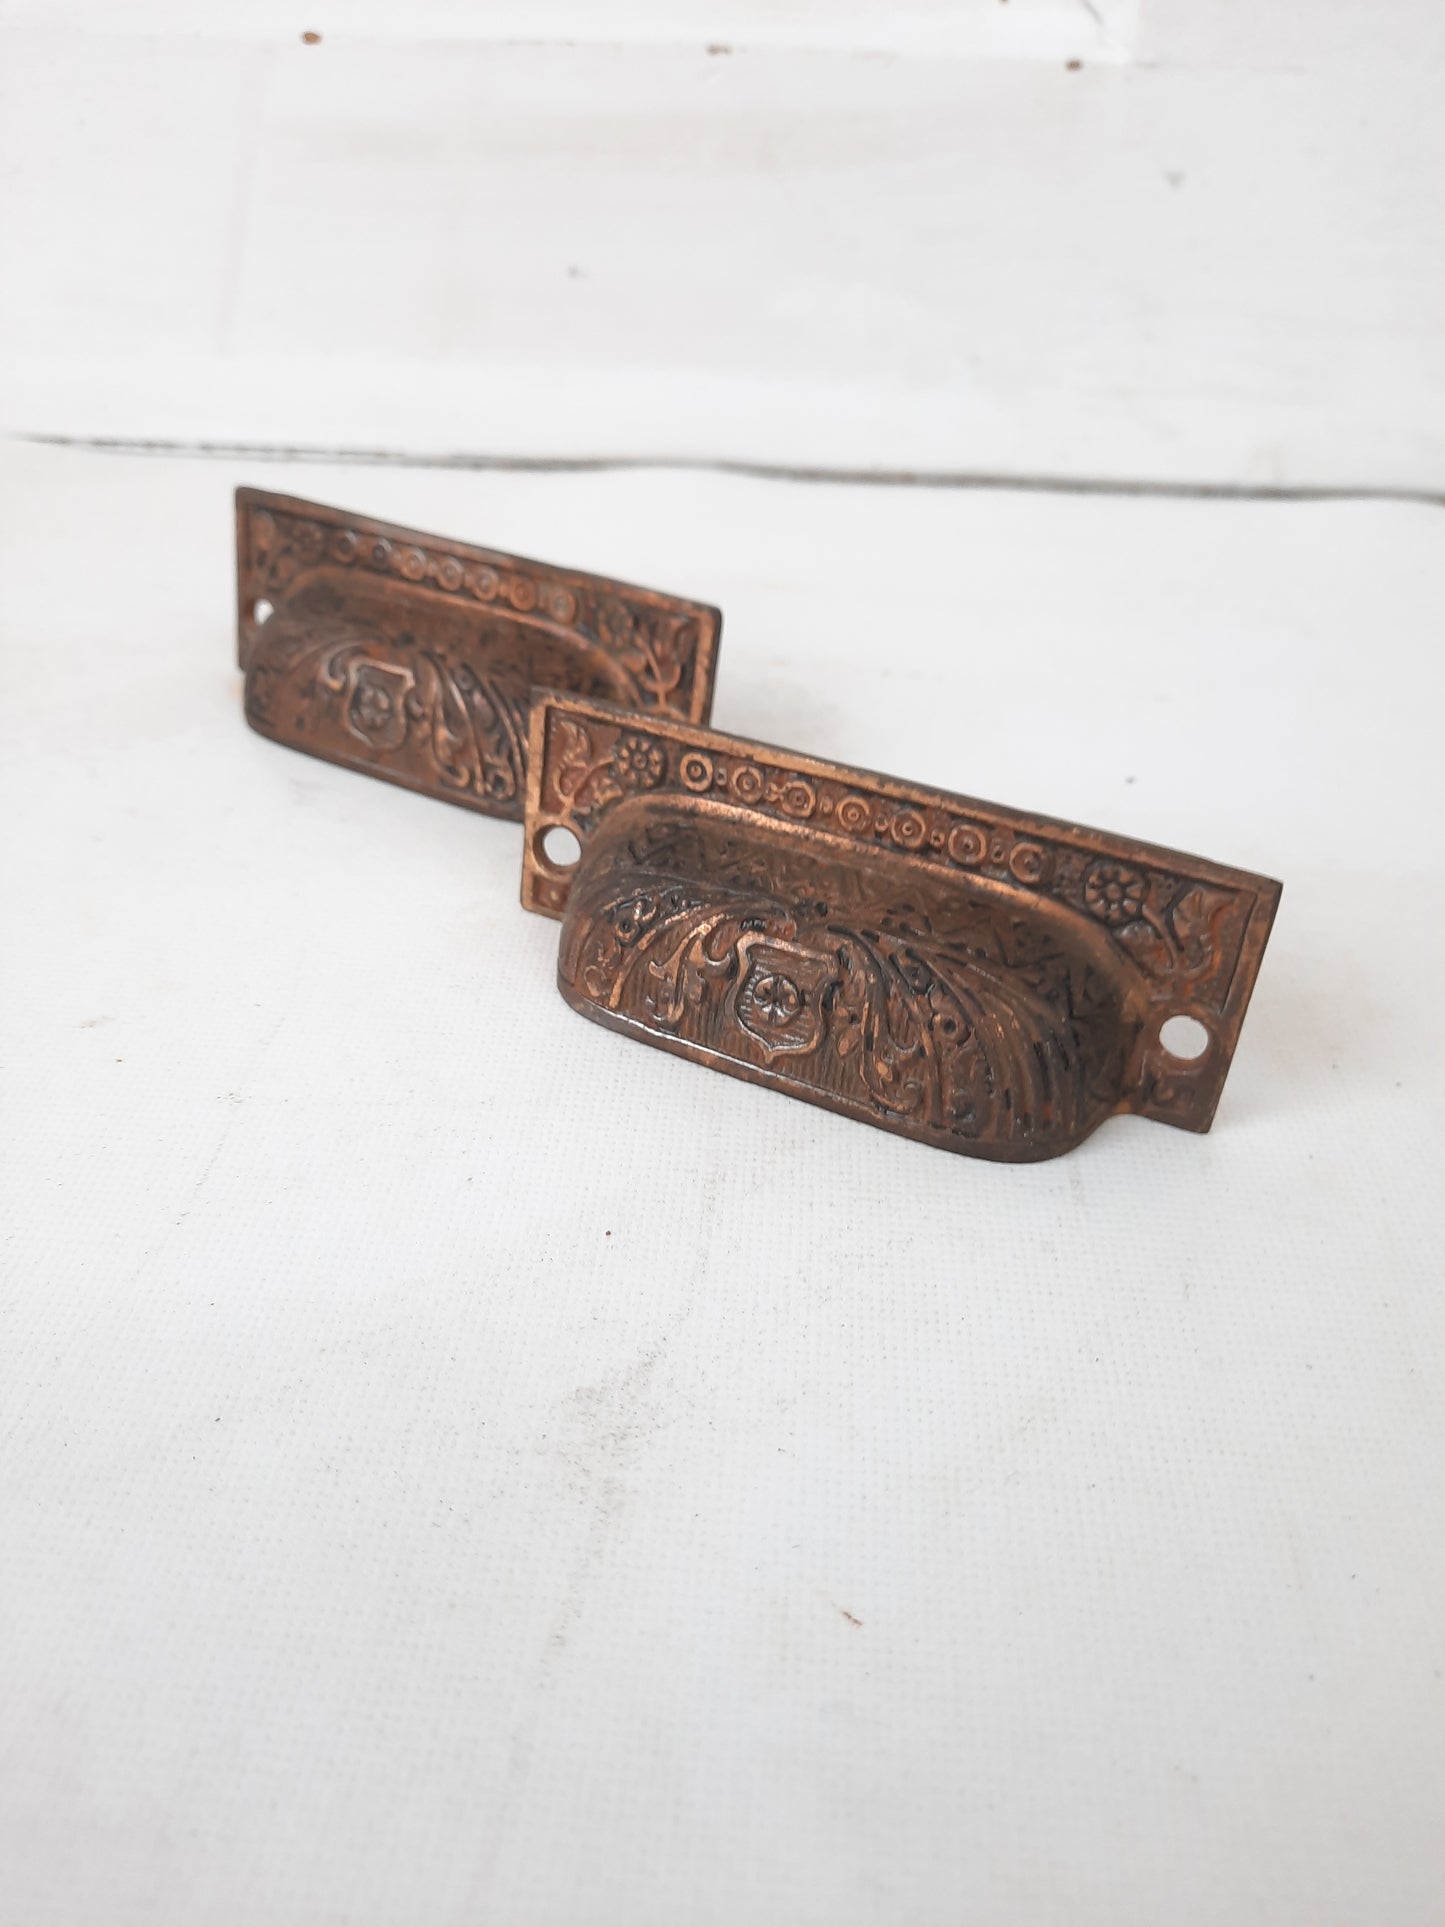 Two Ornate Brass-Plated Victorian Cast Iron Bin Pulls, Antique Drawer Handle, Apothecary Pulls 010503